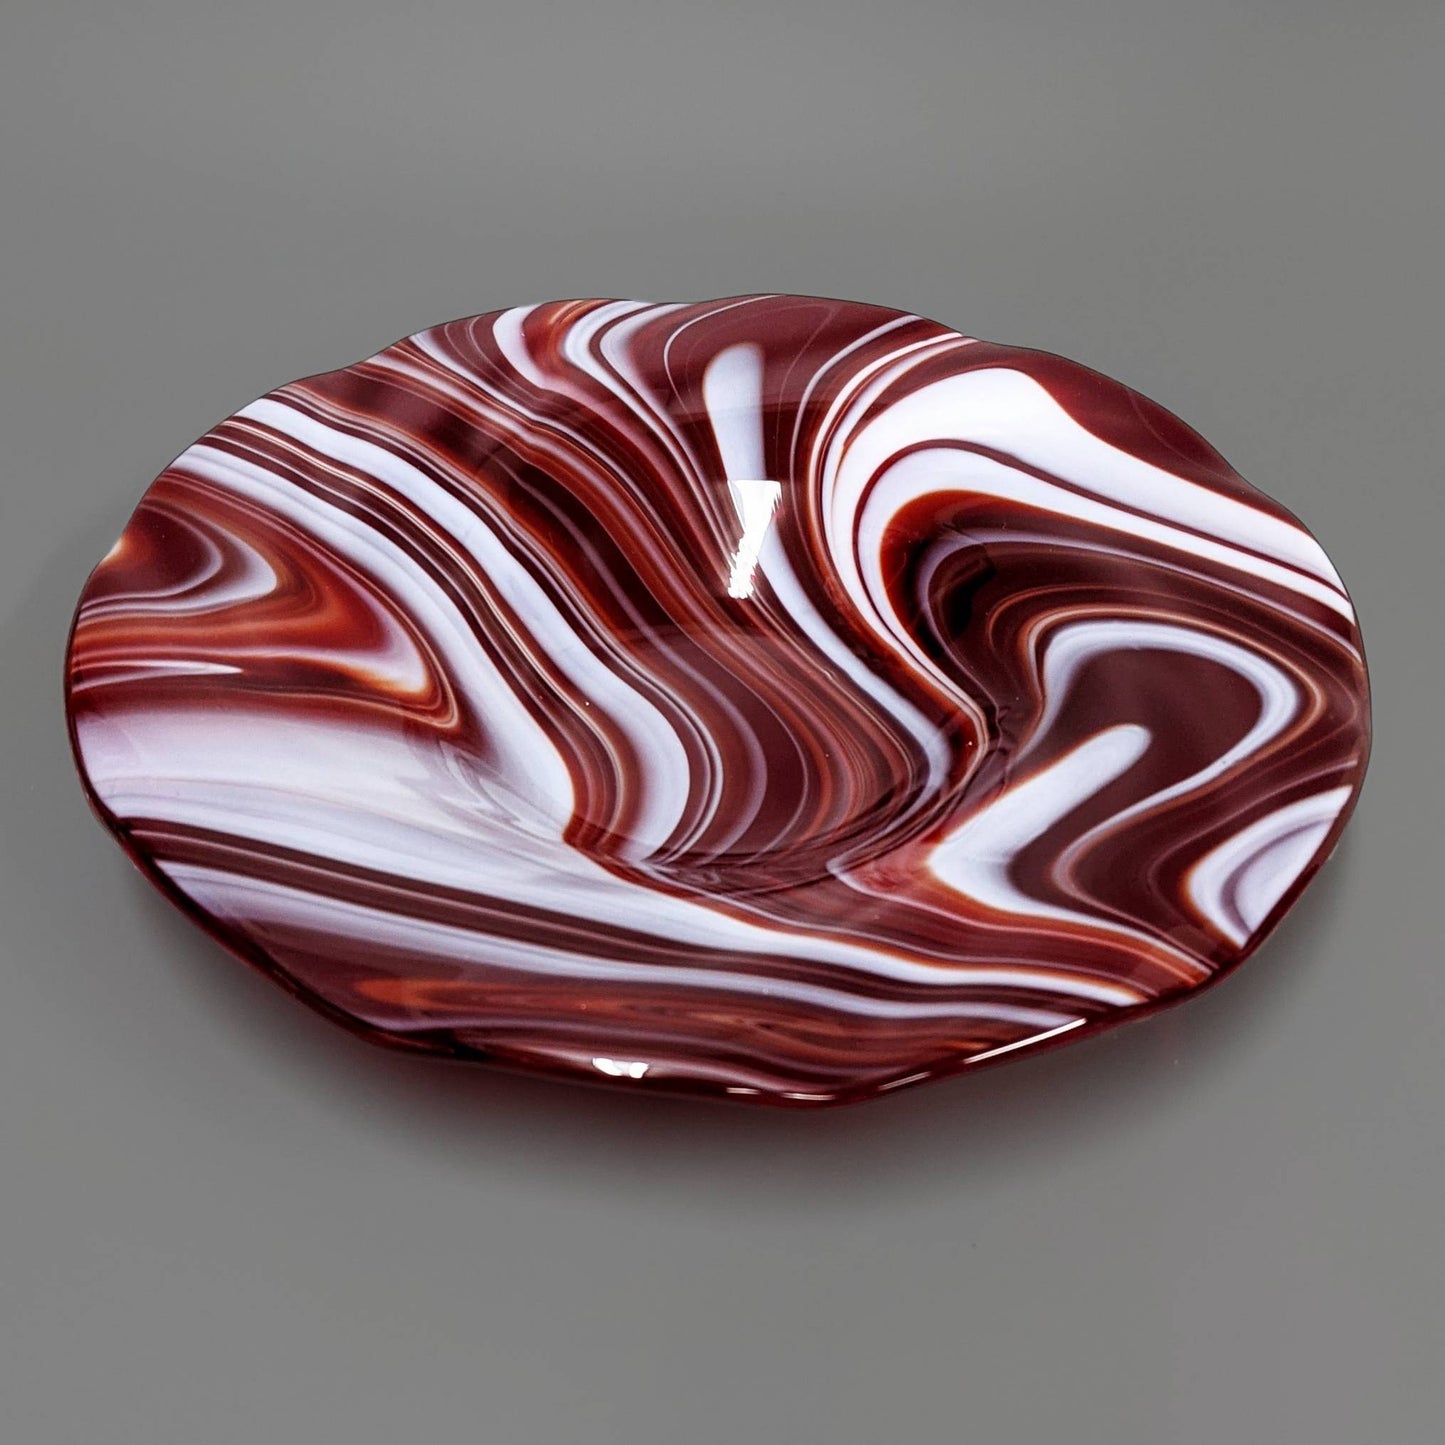 Peppermint Candy Cane Art Glass Bowl | The Glass Rainbow